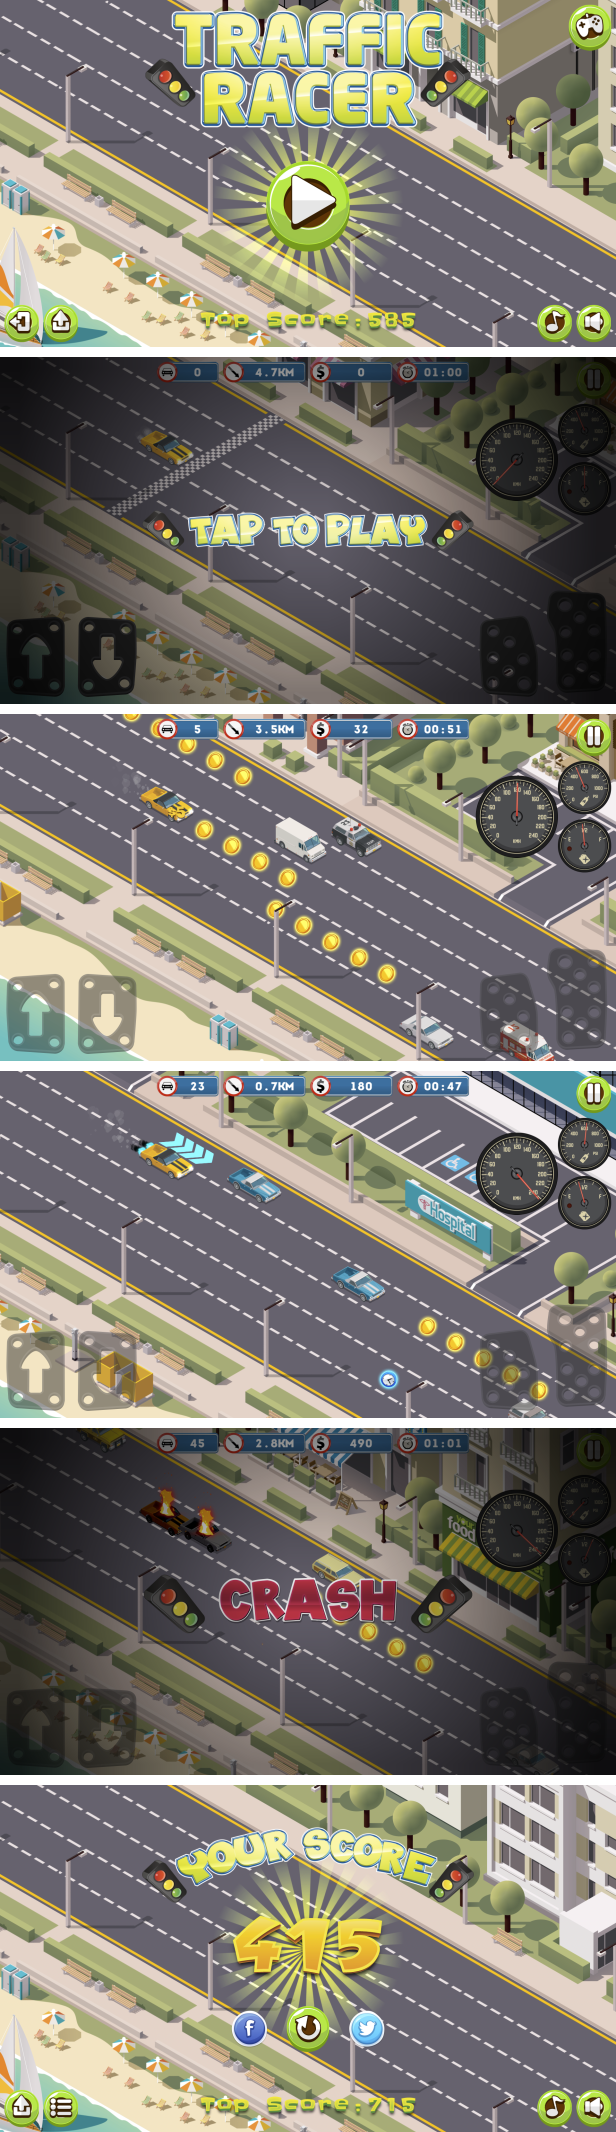 Traffic Racer - HTML5 Game + Mobile Version! (Construct 3 | Construct 2 | Capx) - 3